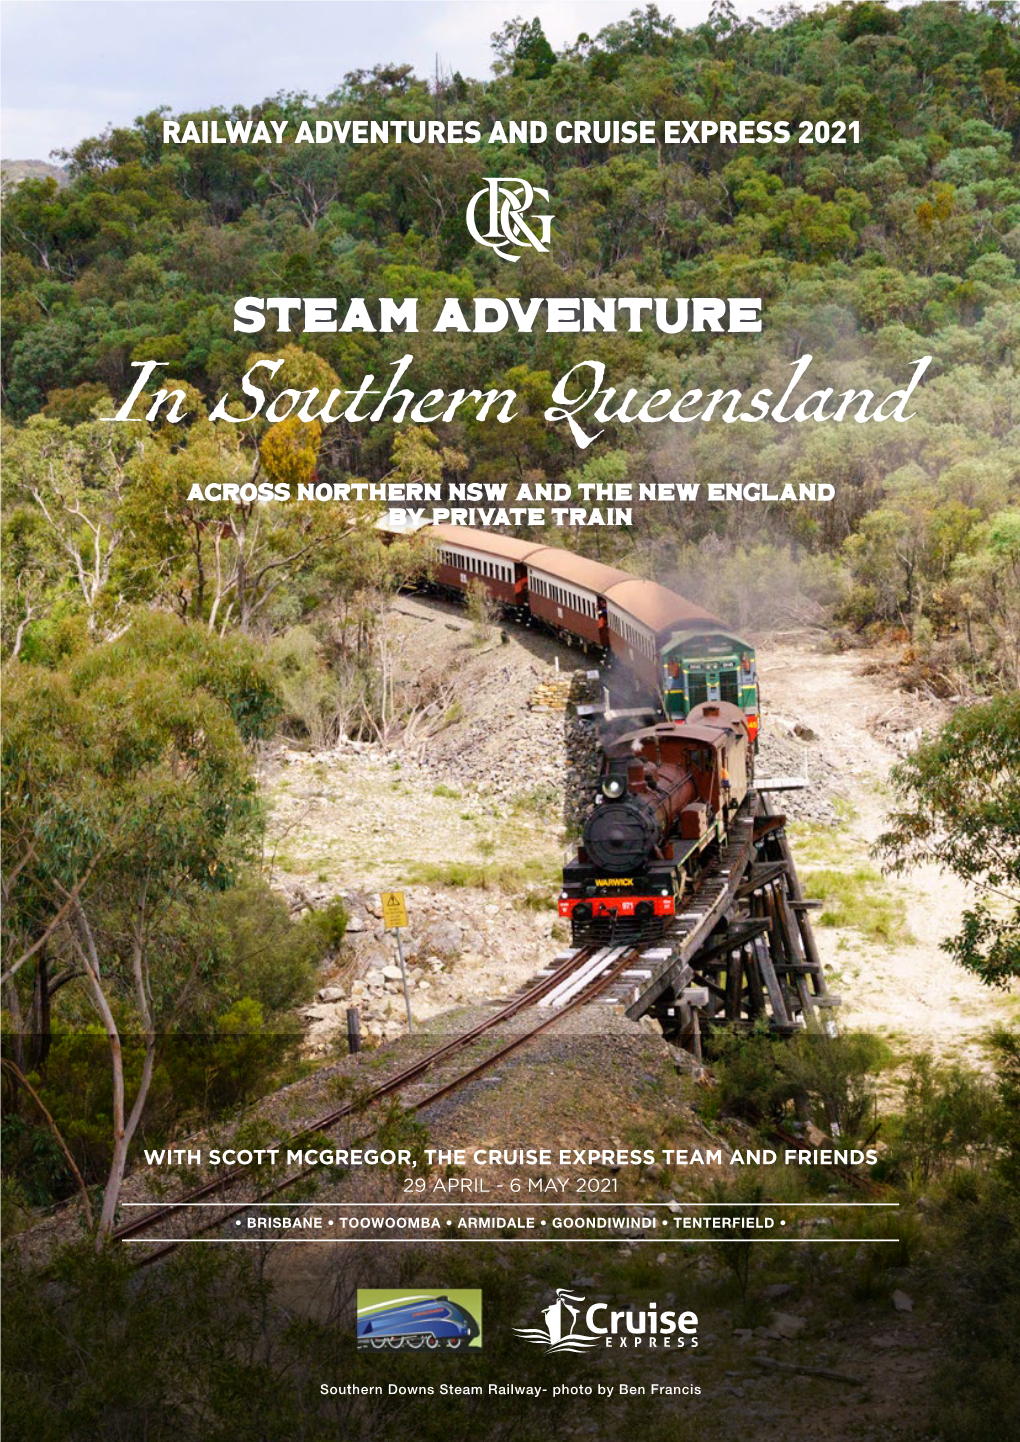 In Southern Queensland Across Northern NSW and the New England by Private Train